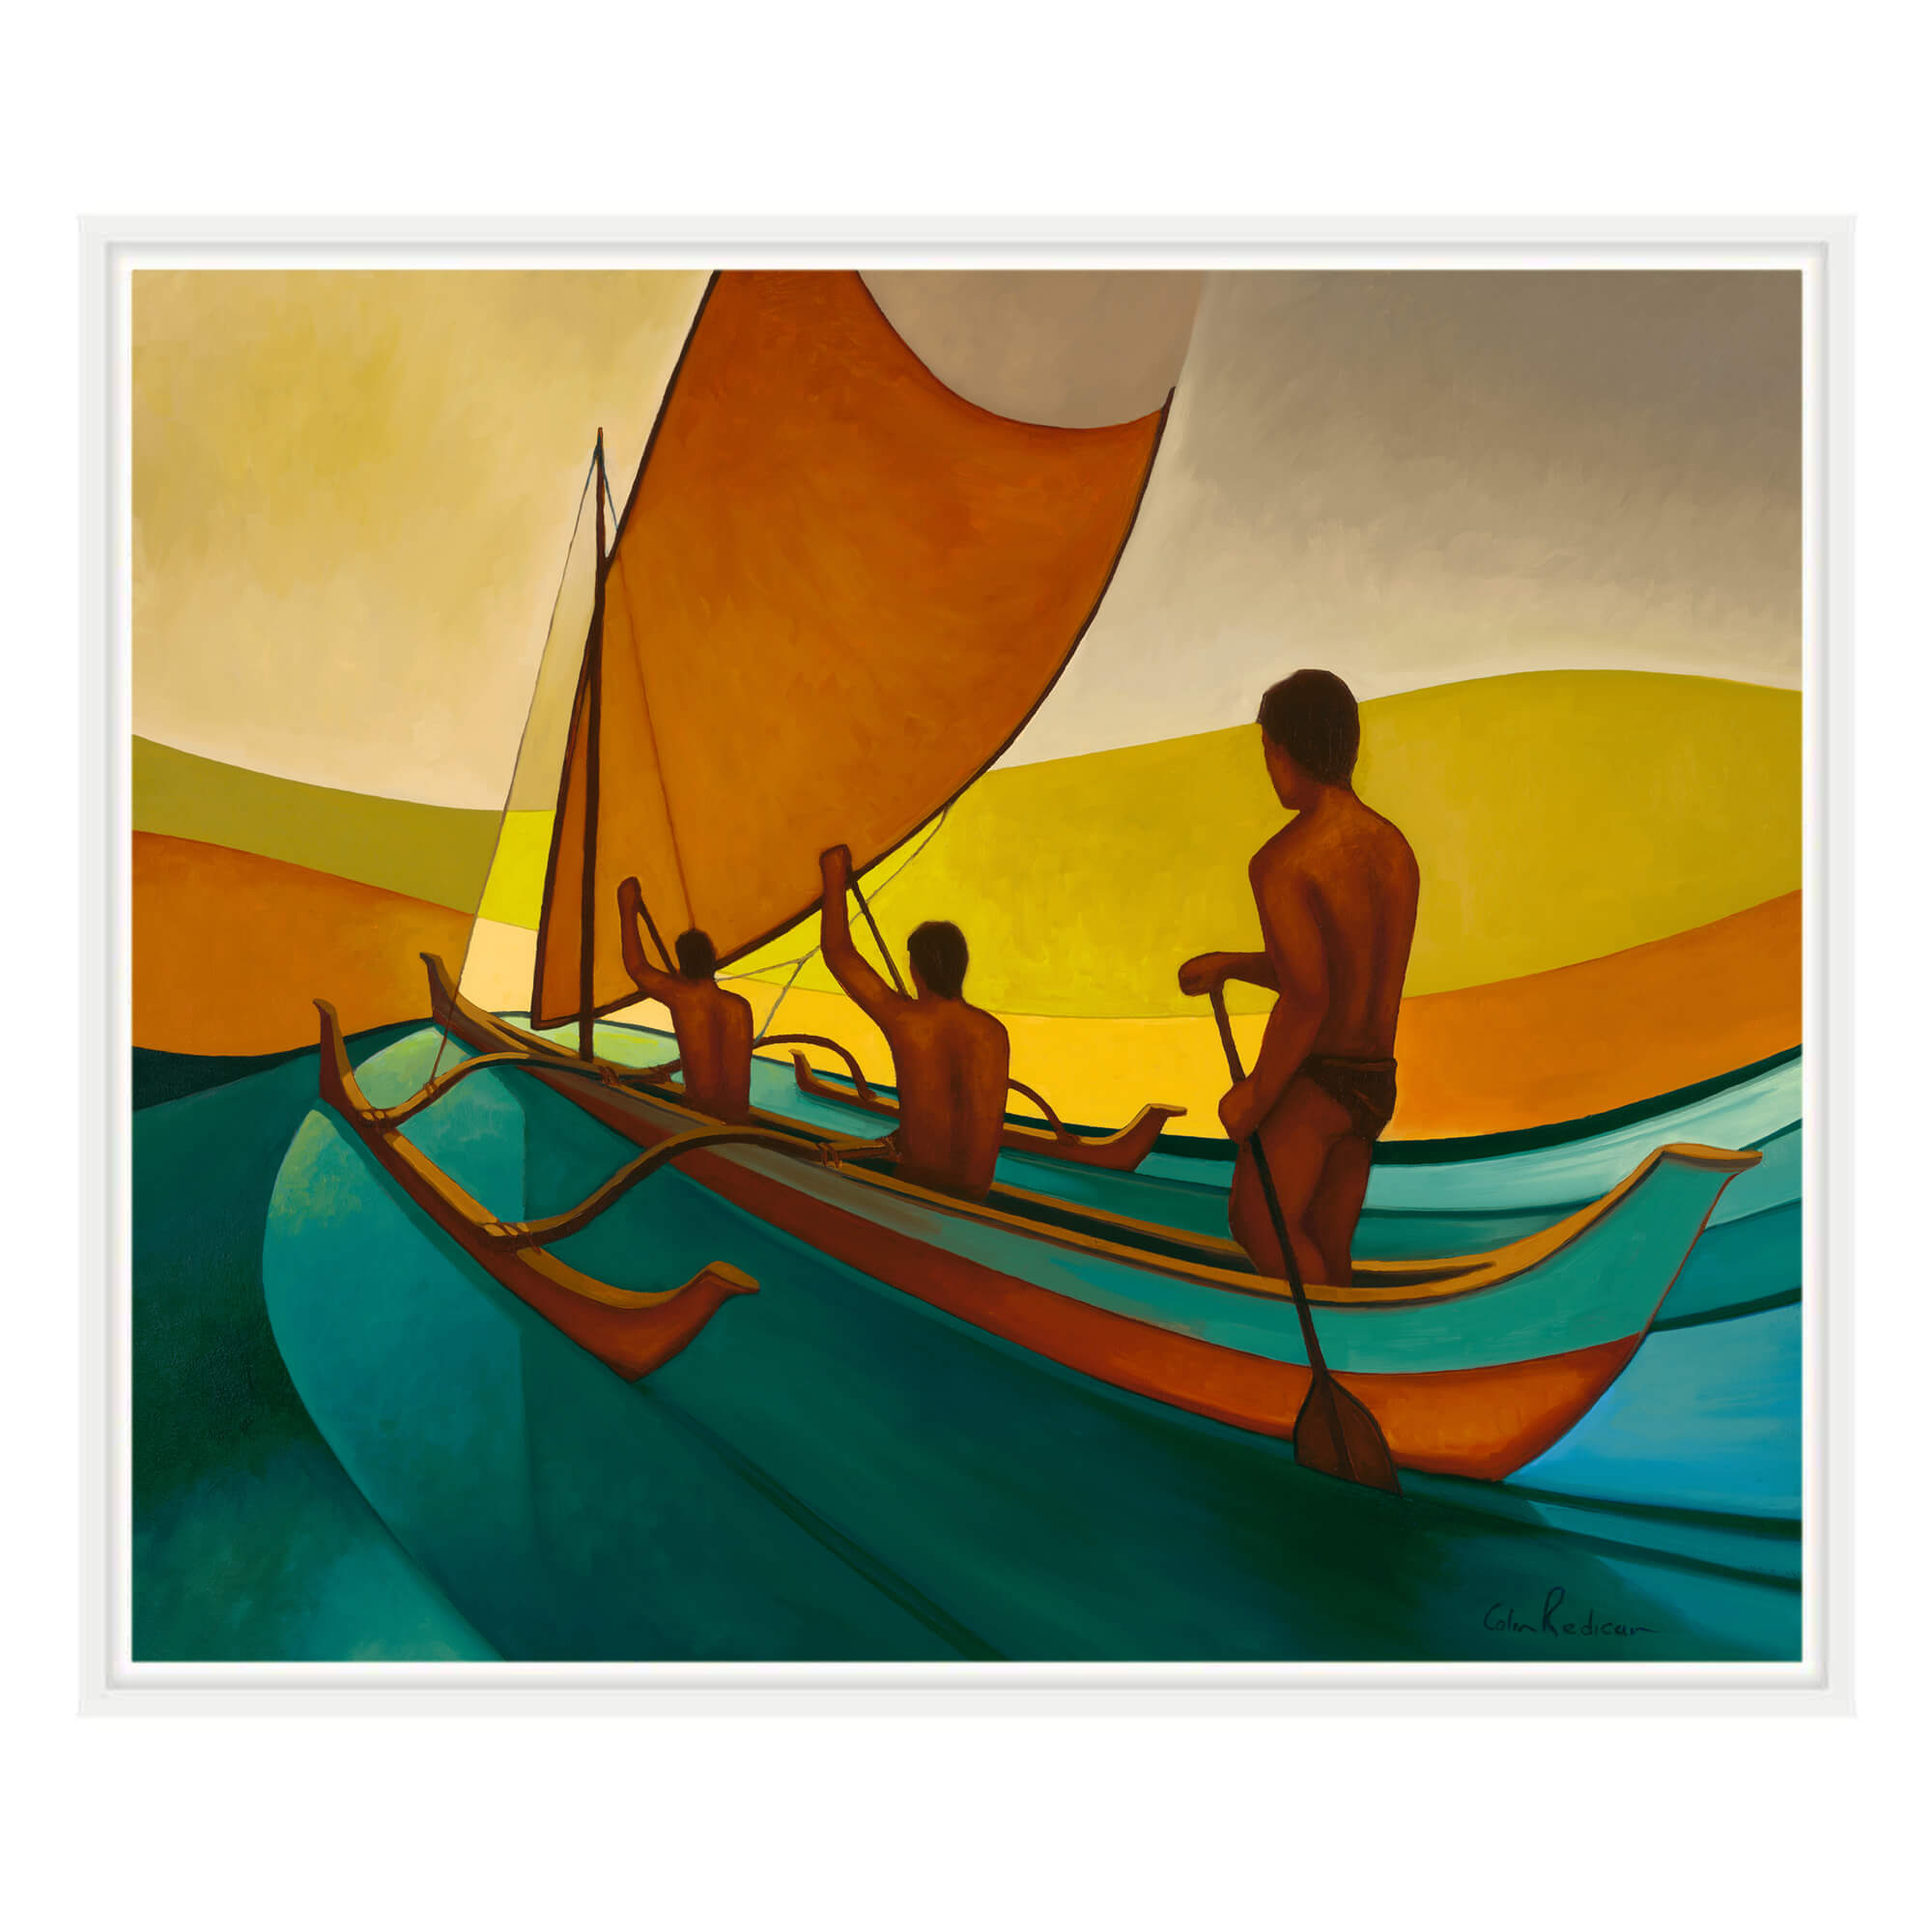 A teal hued ocean water with men in a canoe by Hawaii artist Colin Redican